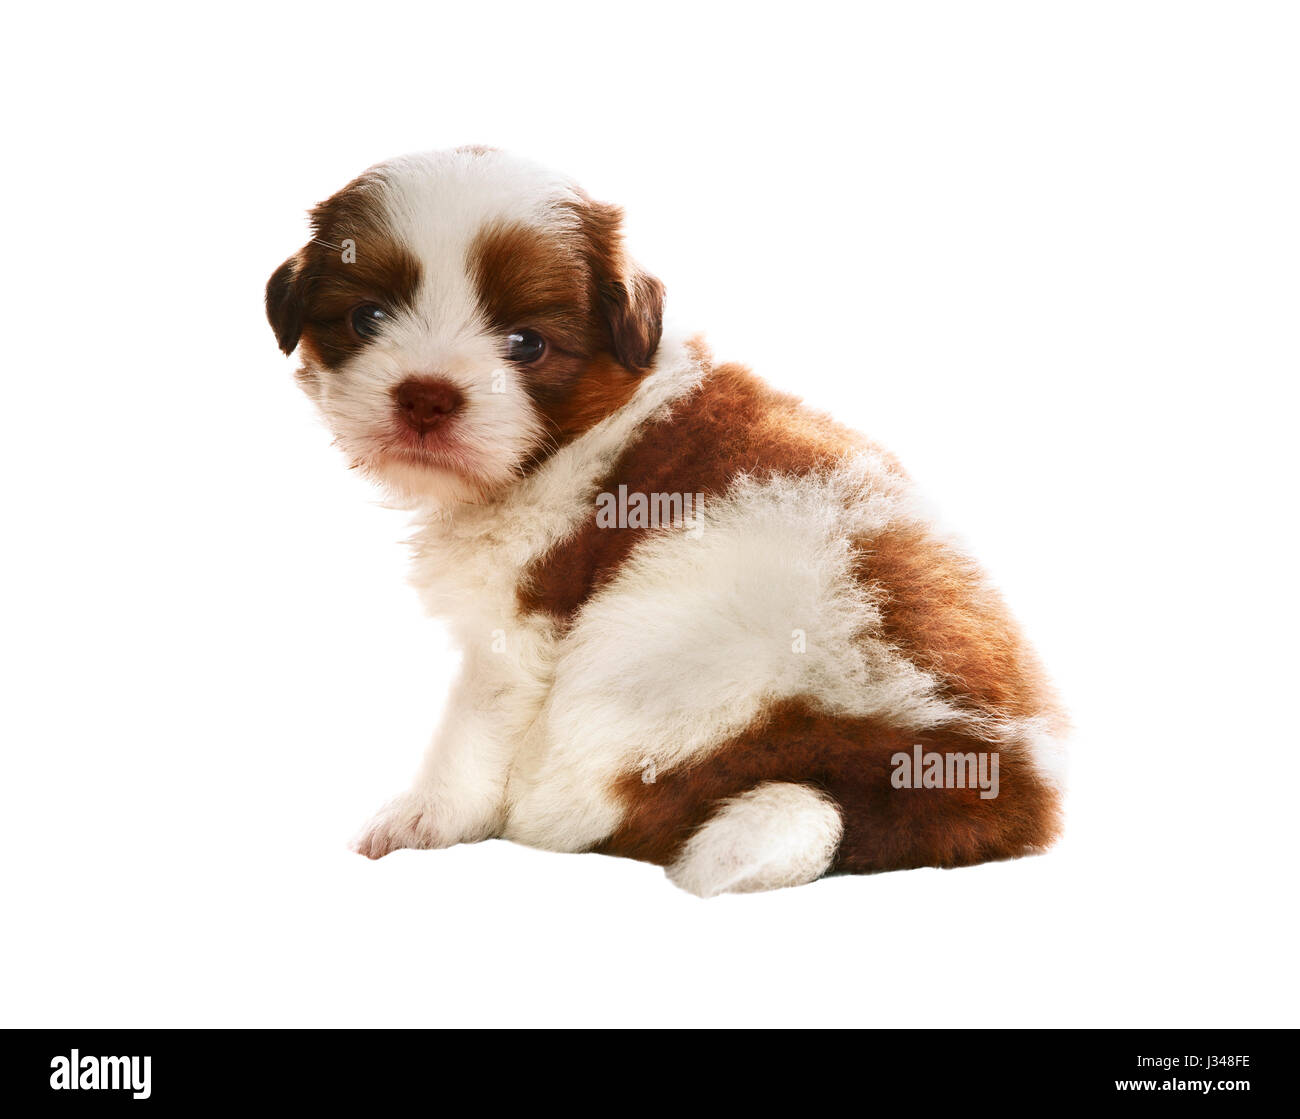 face of adorable baby shih tzu pedigree dog sitting and watching to camera with eyes contact isolated white background use for animals and pets theme Stock Photo